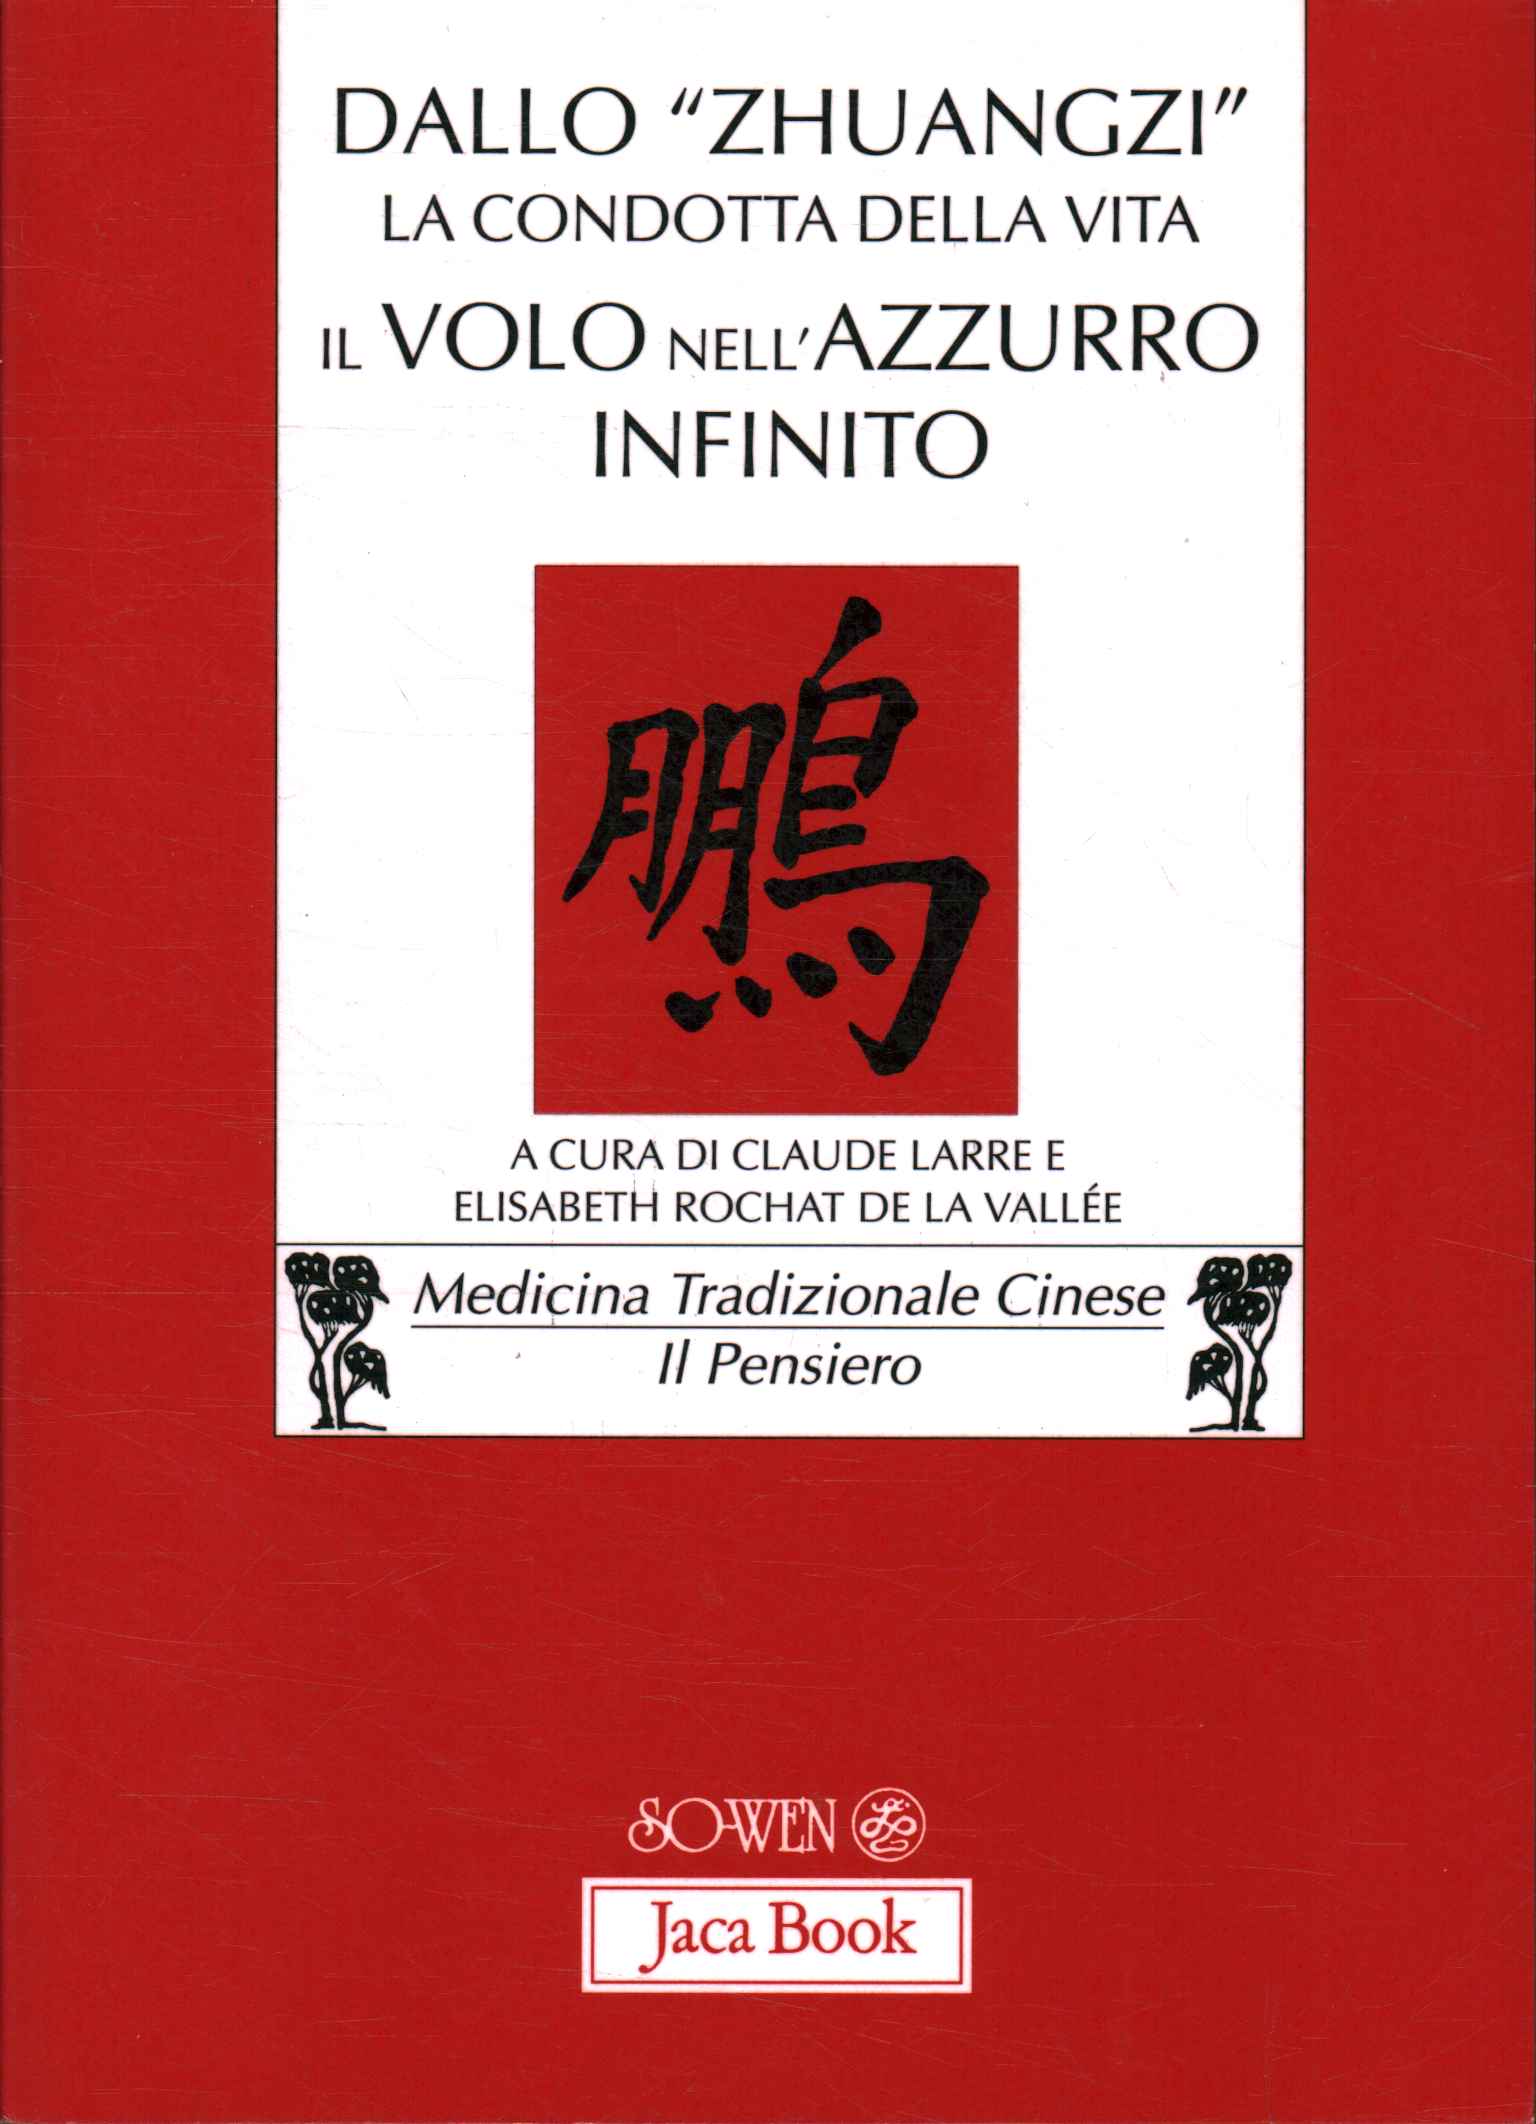 From the Zhuangzi: the conduct of life.%,From the Zhuangzi: the conduct of life.%,From the Zhuangzi: the conduct of life.%